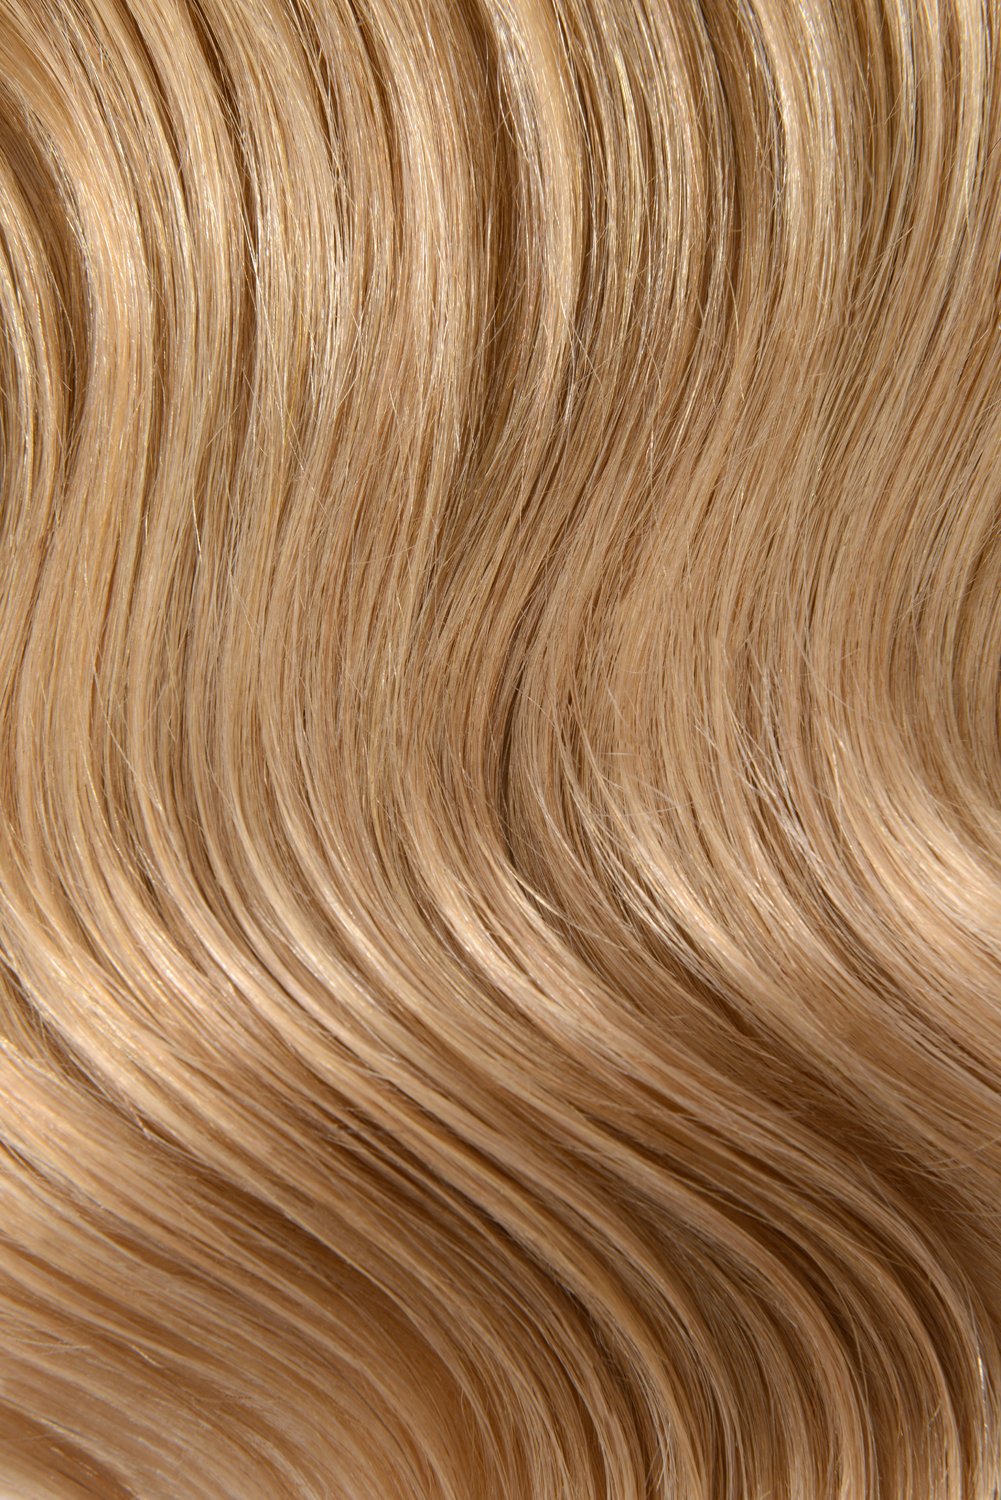 Double Wefted Full Head Remy Clip in Human Hair Extensions - ombre/Ombre (#T1/27)